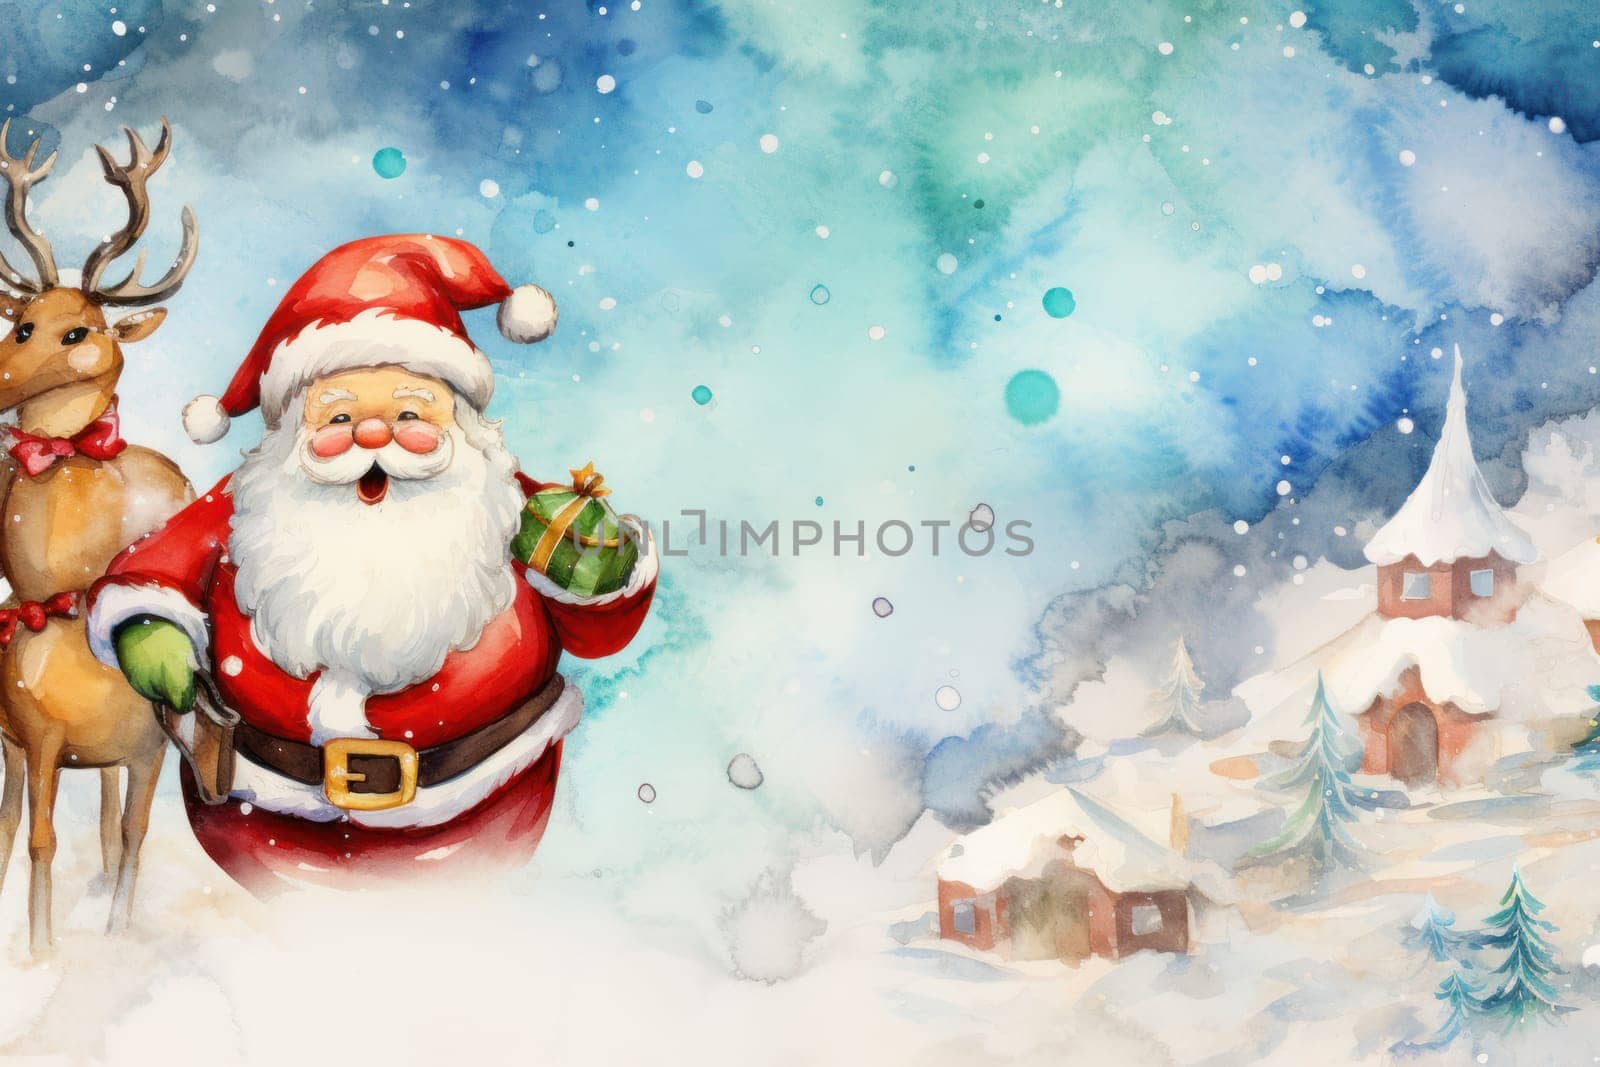 Merry Christmas artistic templates greeting card.